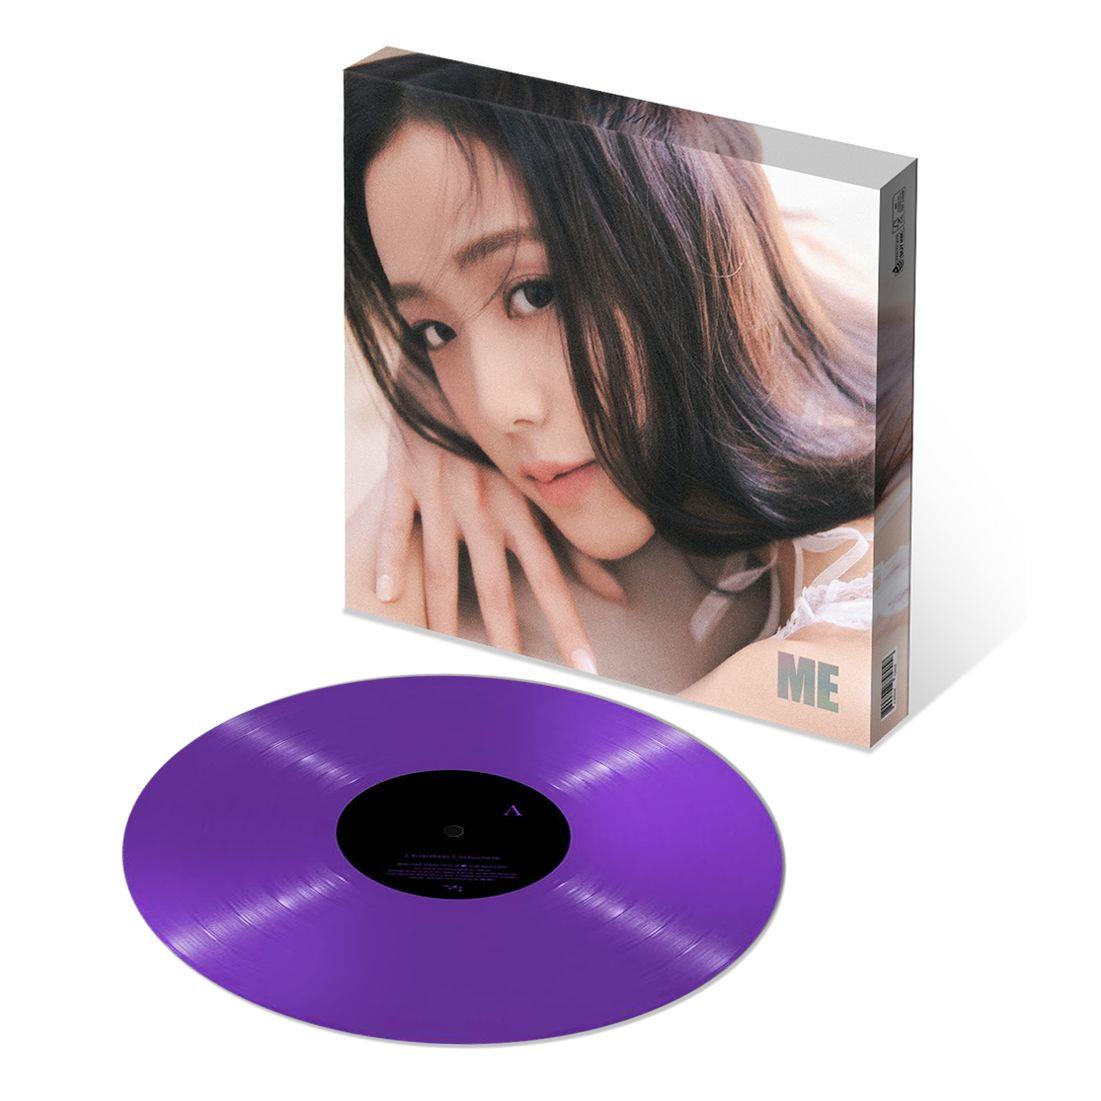 Ashley First Truly Real Tm Collectible Vinyl